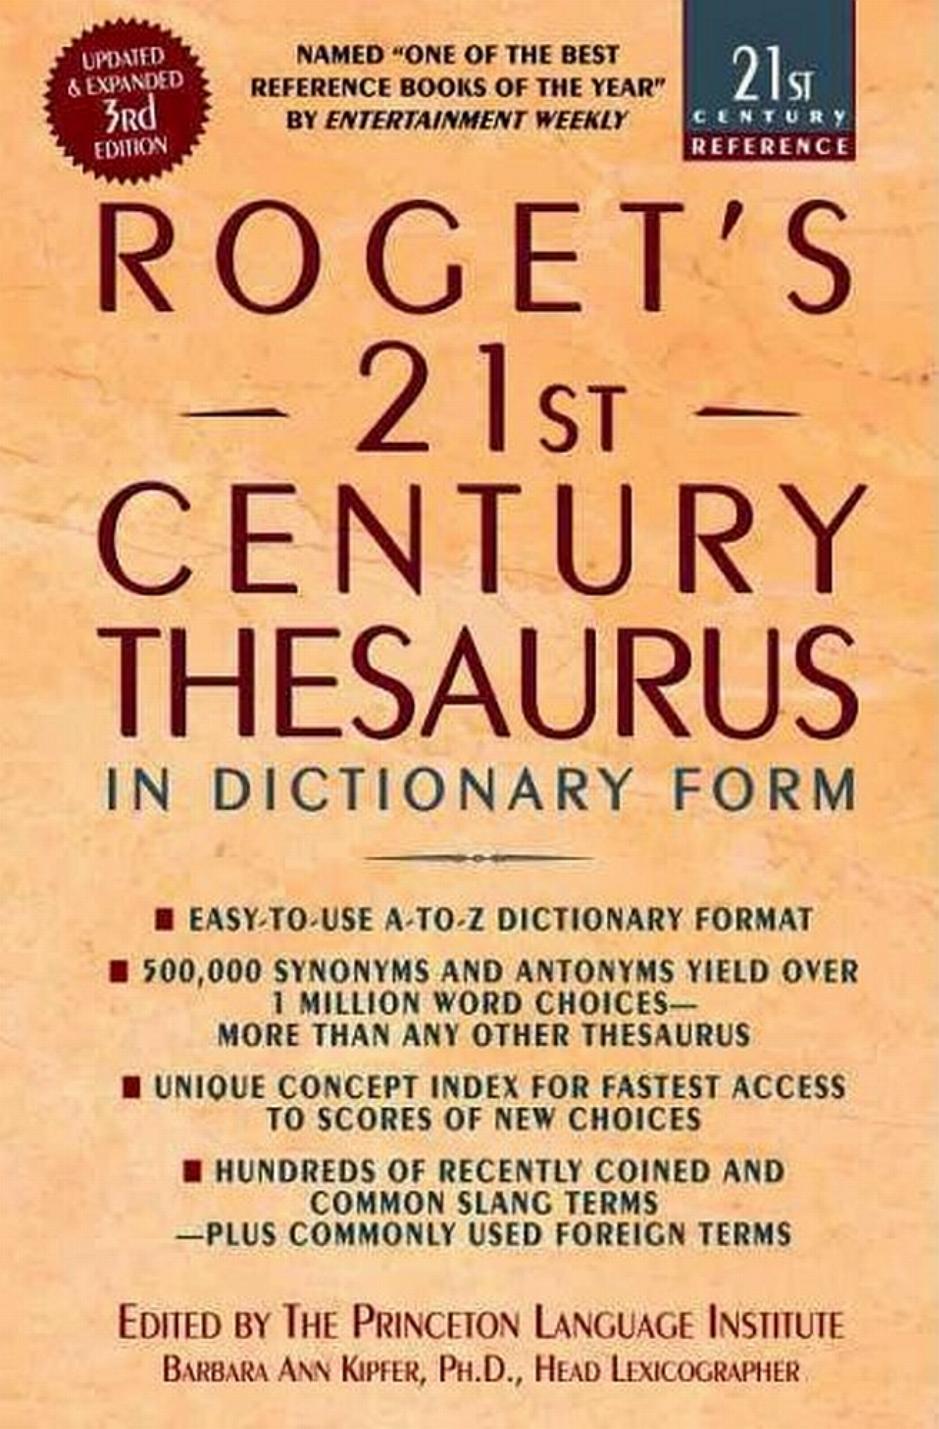 Roget's 21st Century Thesaurus in Dictionary Form: The Essential Reference for Home, School, or Office